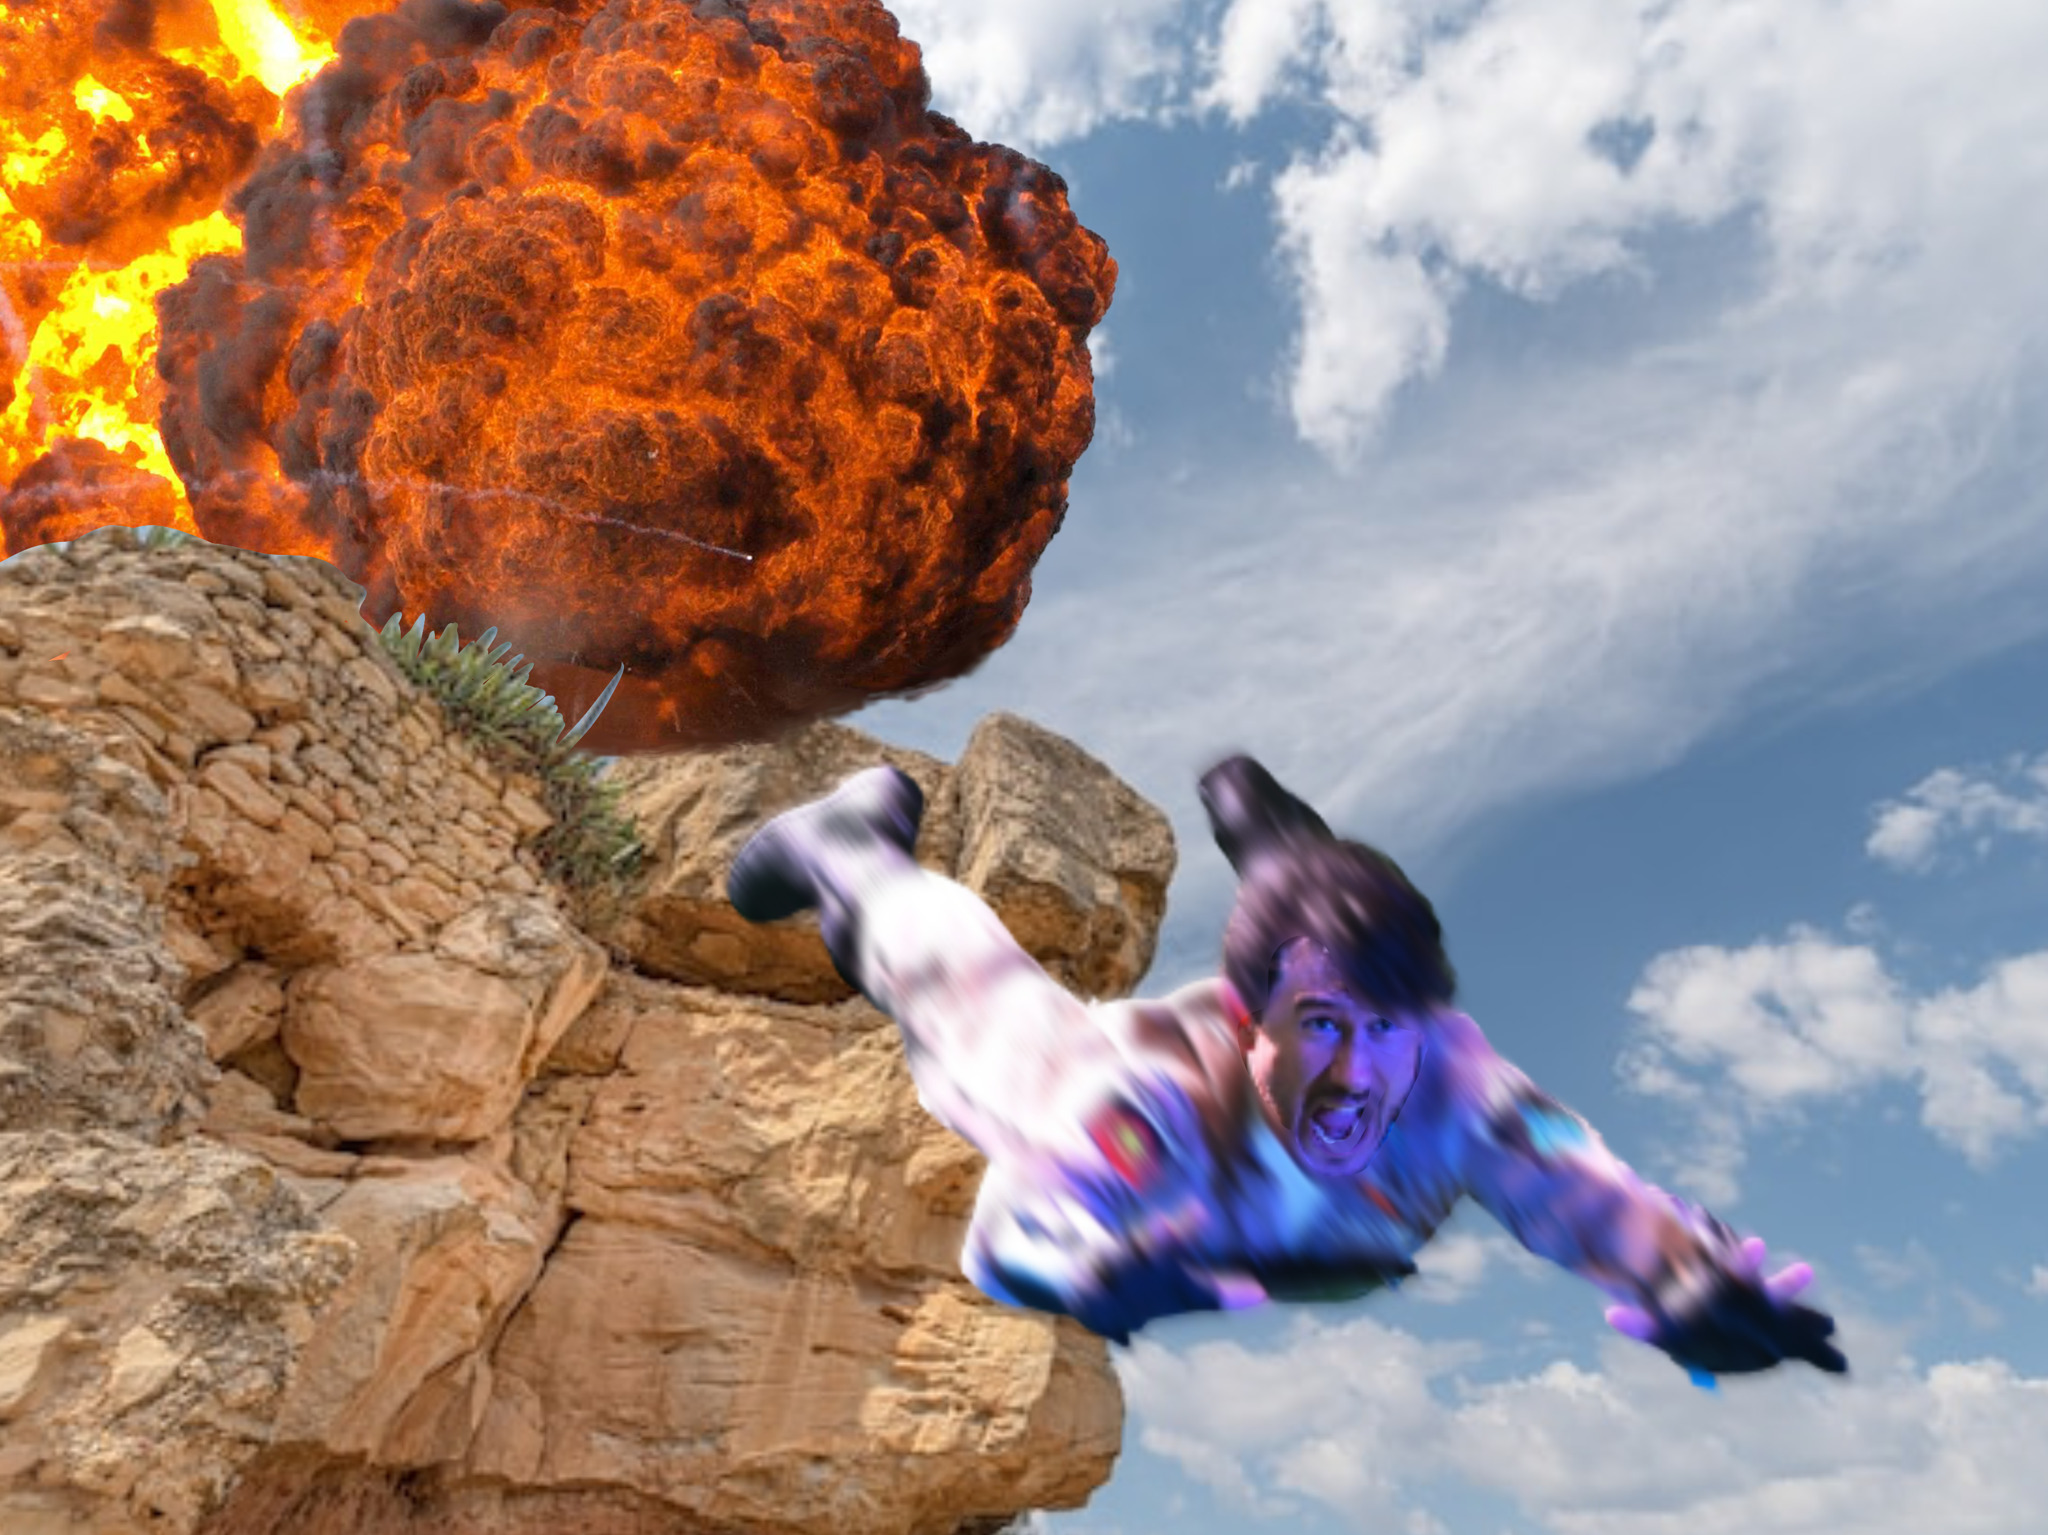 emdoestuff:my ‘creations’ with the meme. clearly, they are:markiplier at the water park, markiplier escaping an explosion, markiplier jumping off a plane 